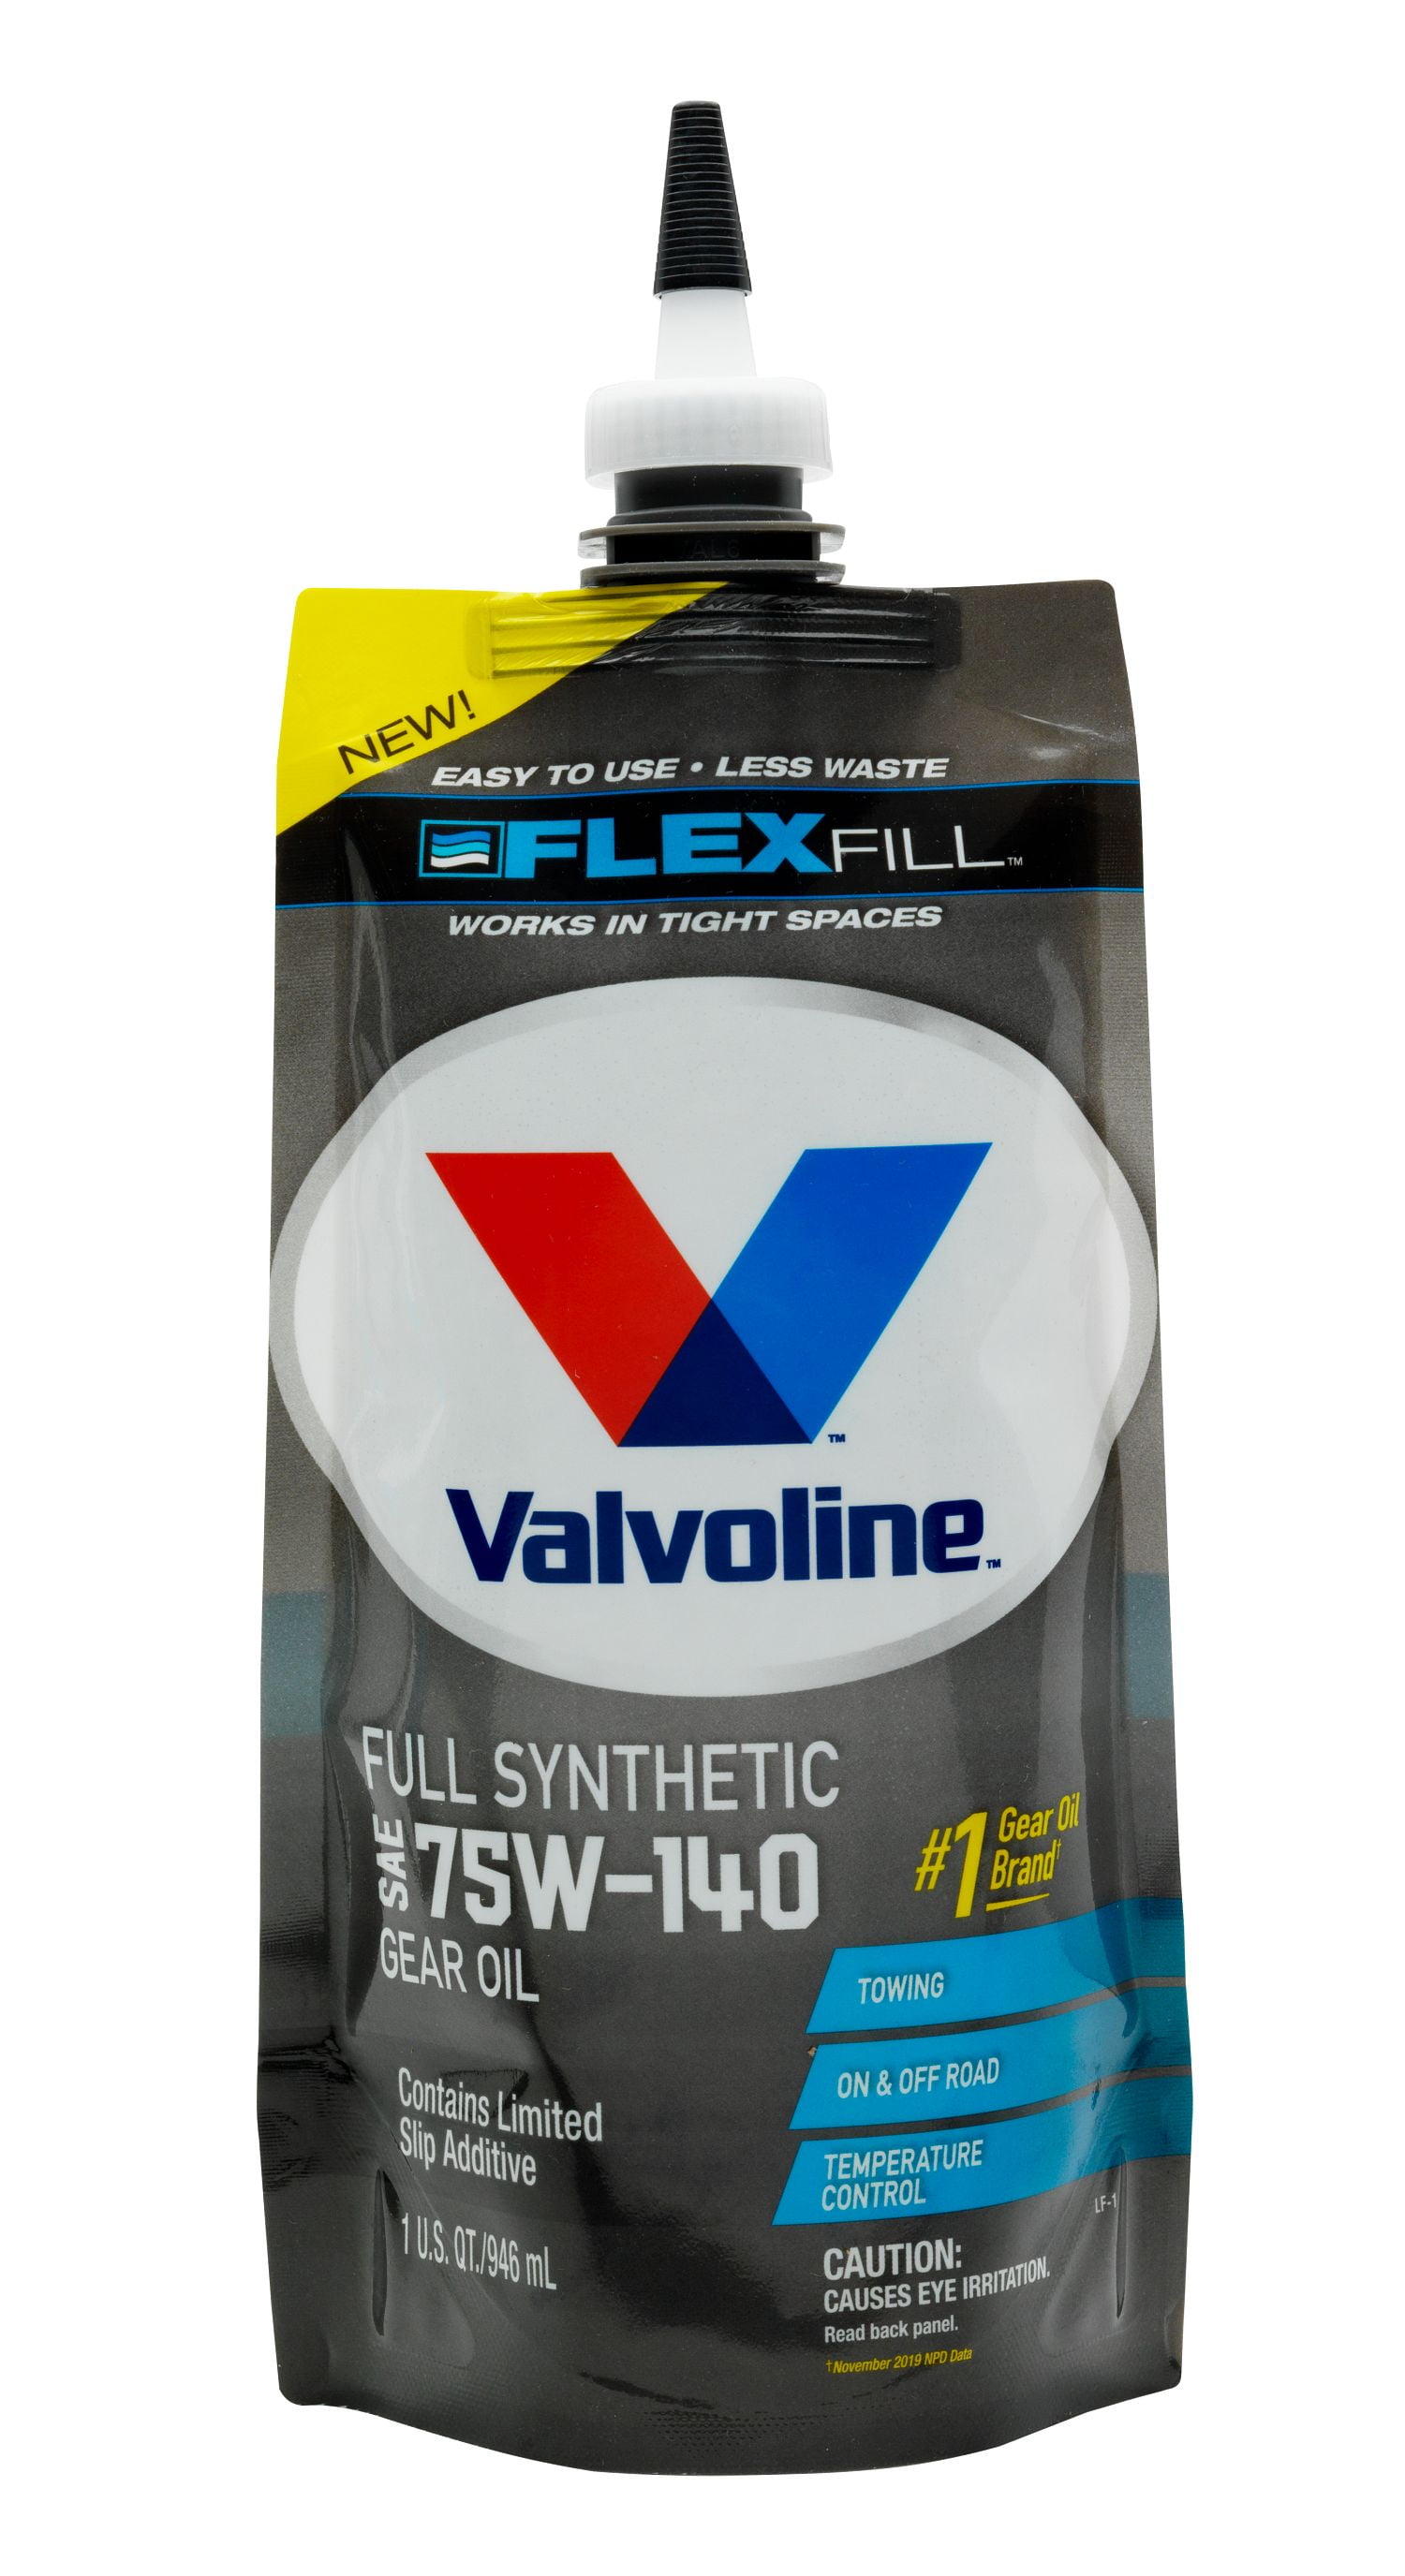 Valvoline Flex Fill SAE 75W-140 Full Synthetic Gear Oil 1 QT Squeeze Pouch